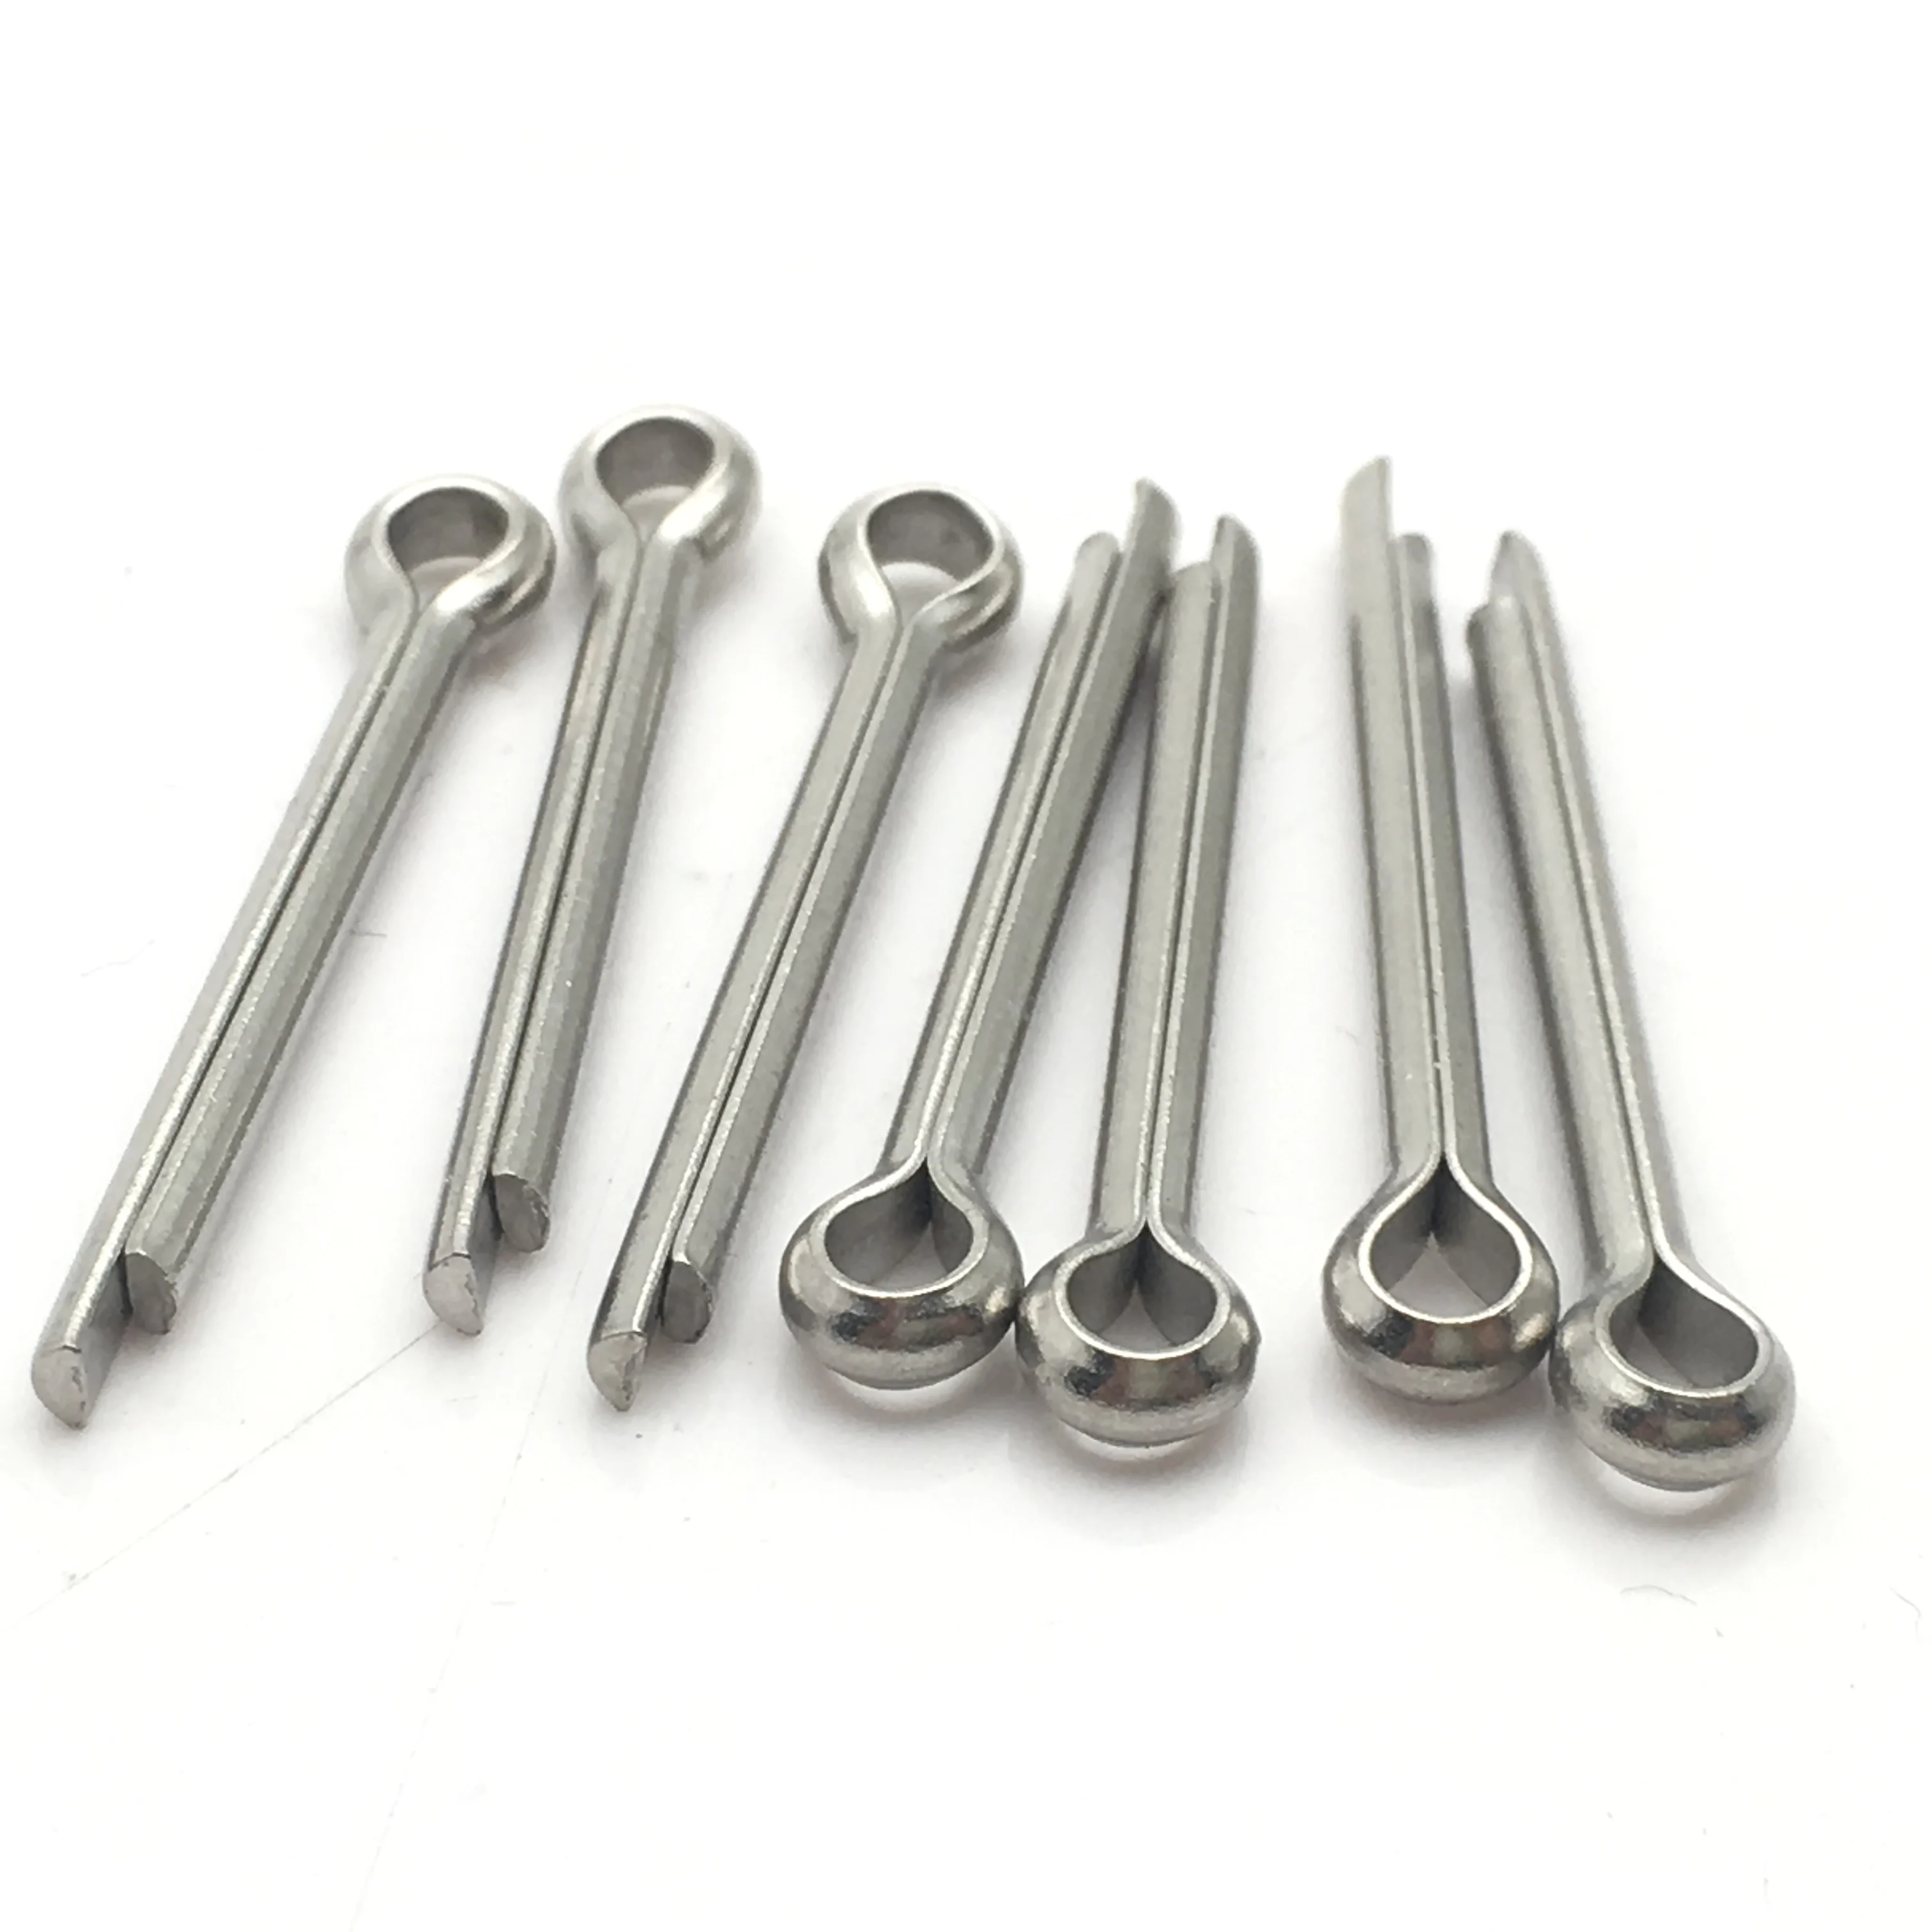 Hot Sale Stainless Steel Ss304 Split Slotted Spring Pin Gb91 Cotter Pins Din94 Buy Cotter Pin 